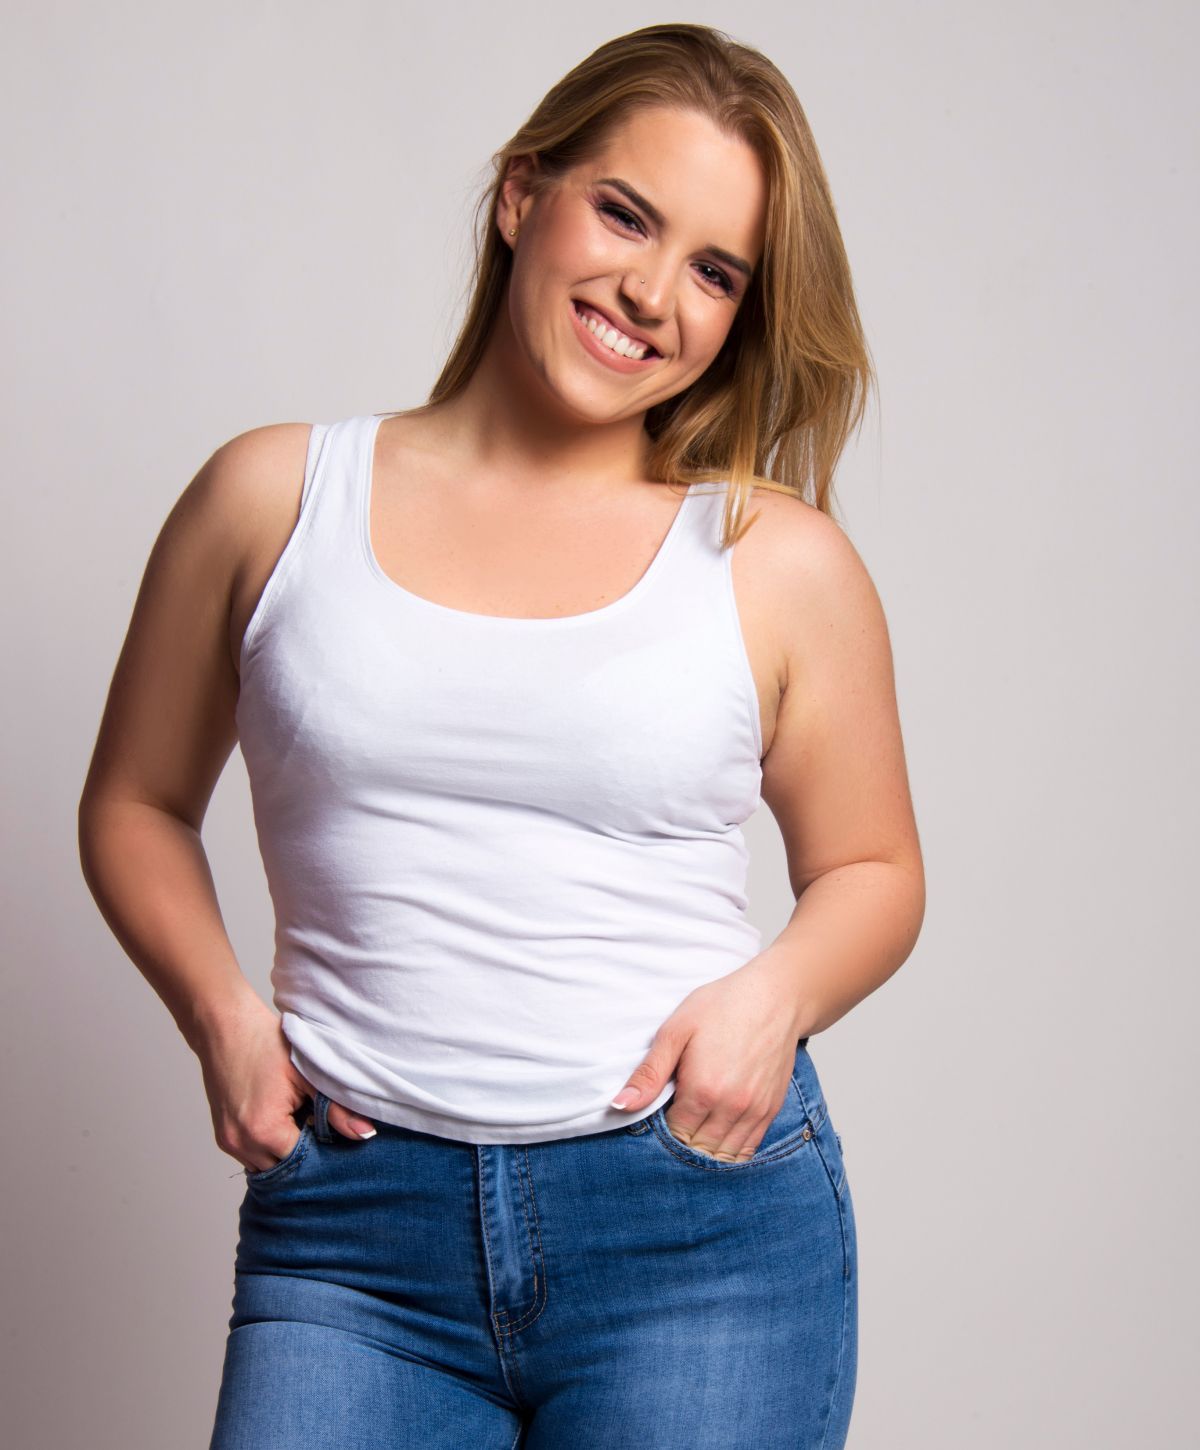 Franklin Cellulite Reduction model with blonde hair